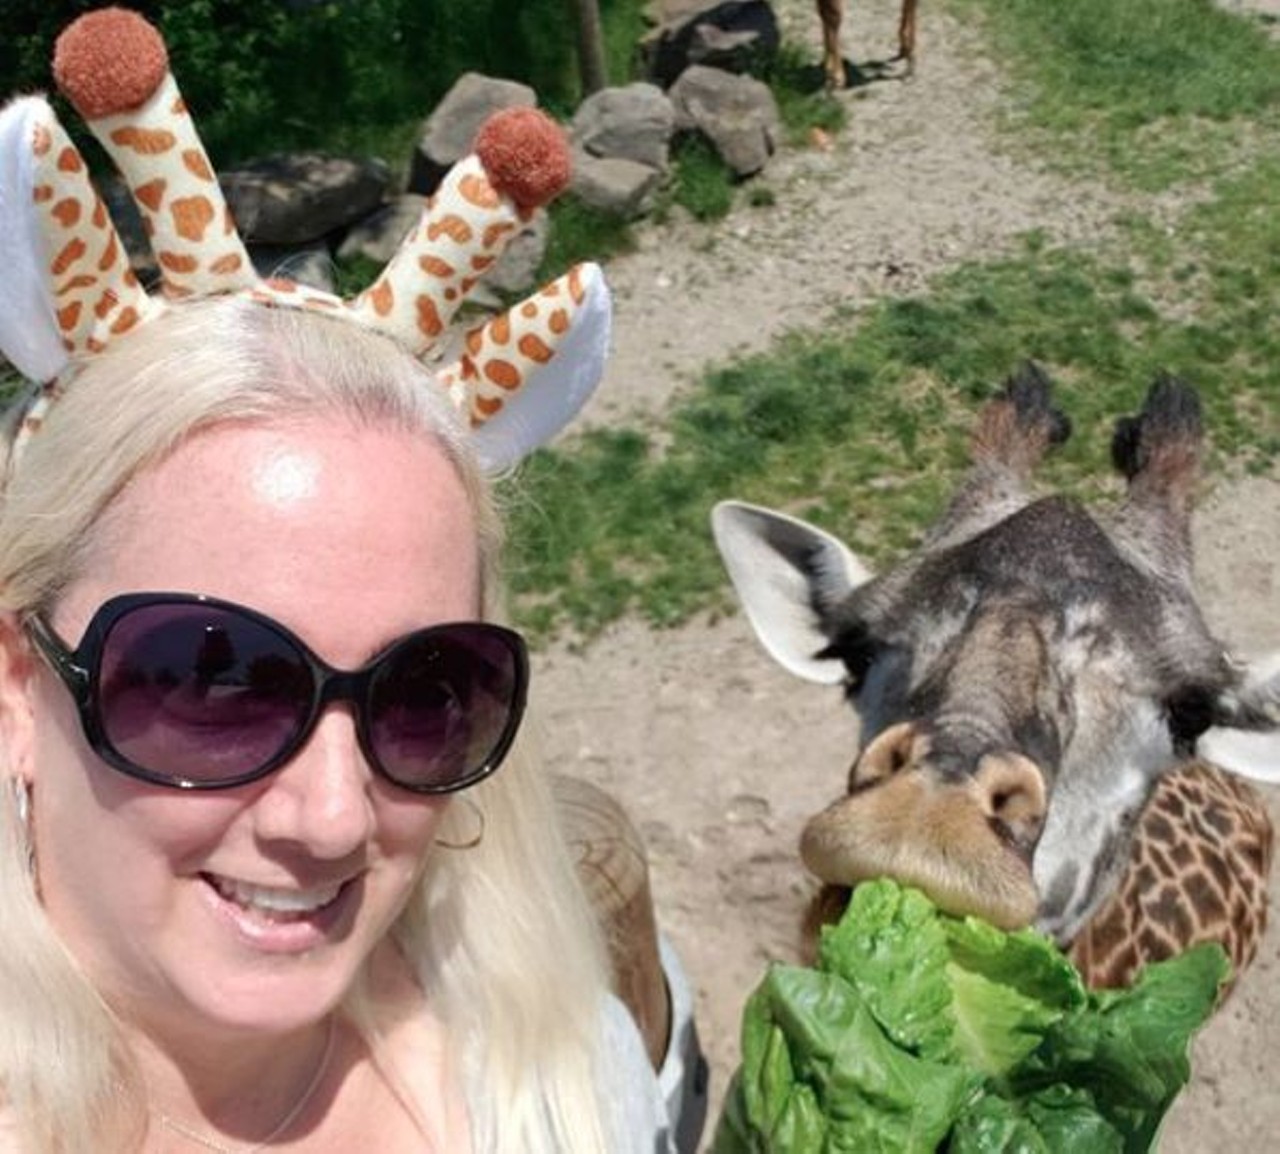  Cleveland Metroparks Zoo
3900 Wildlife Way
With 183 acres of wildlife, fauna and demonstrations to see, the zoo is the best place to take a selfie with a giraffe (and other extraordinary animals). The zoo is open every day and tickets are $14.95 for adults. 
Photo via thegirlsny/Instagram